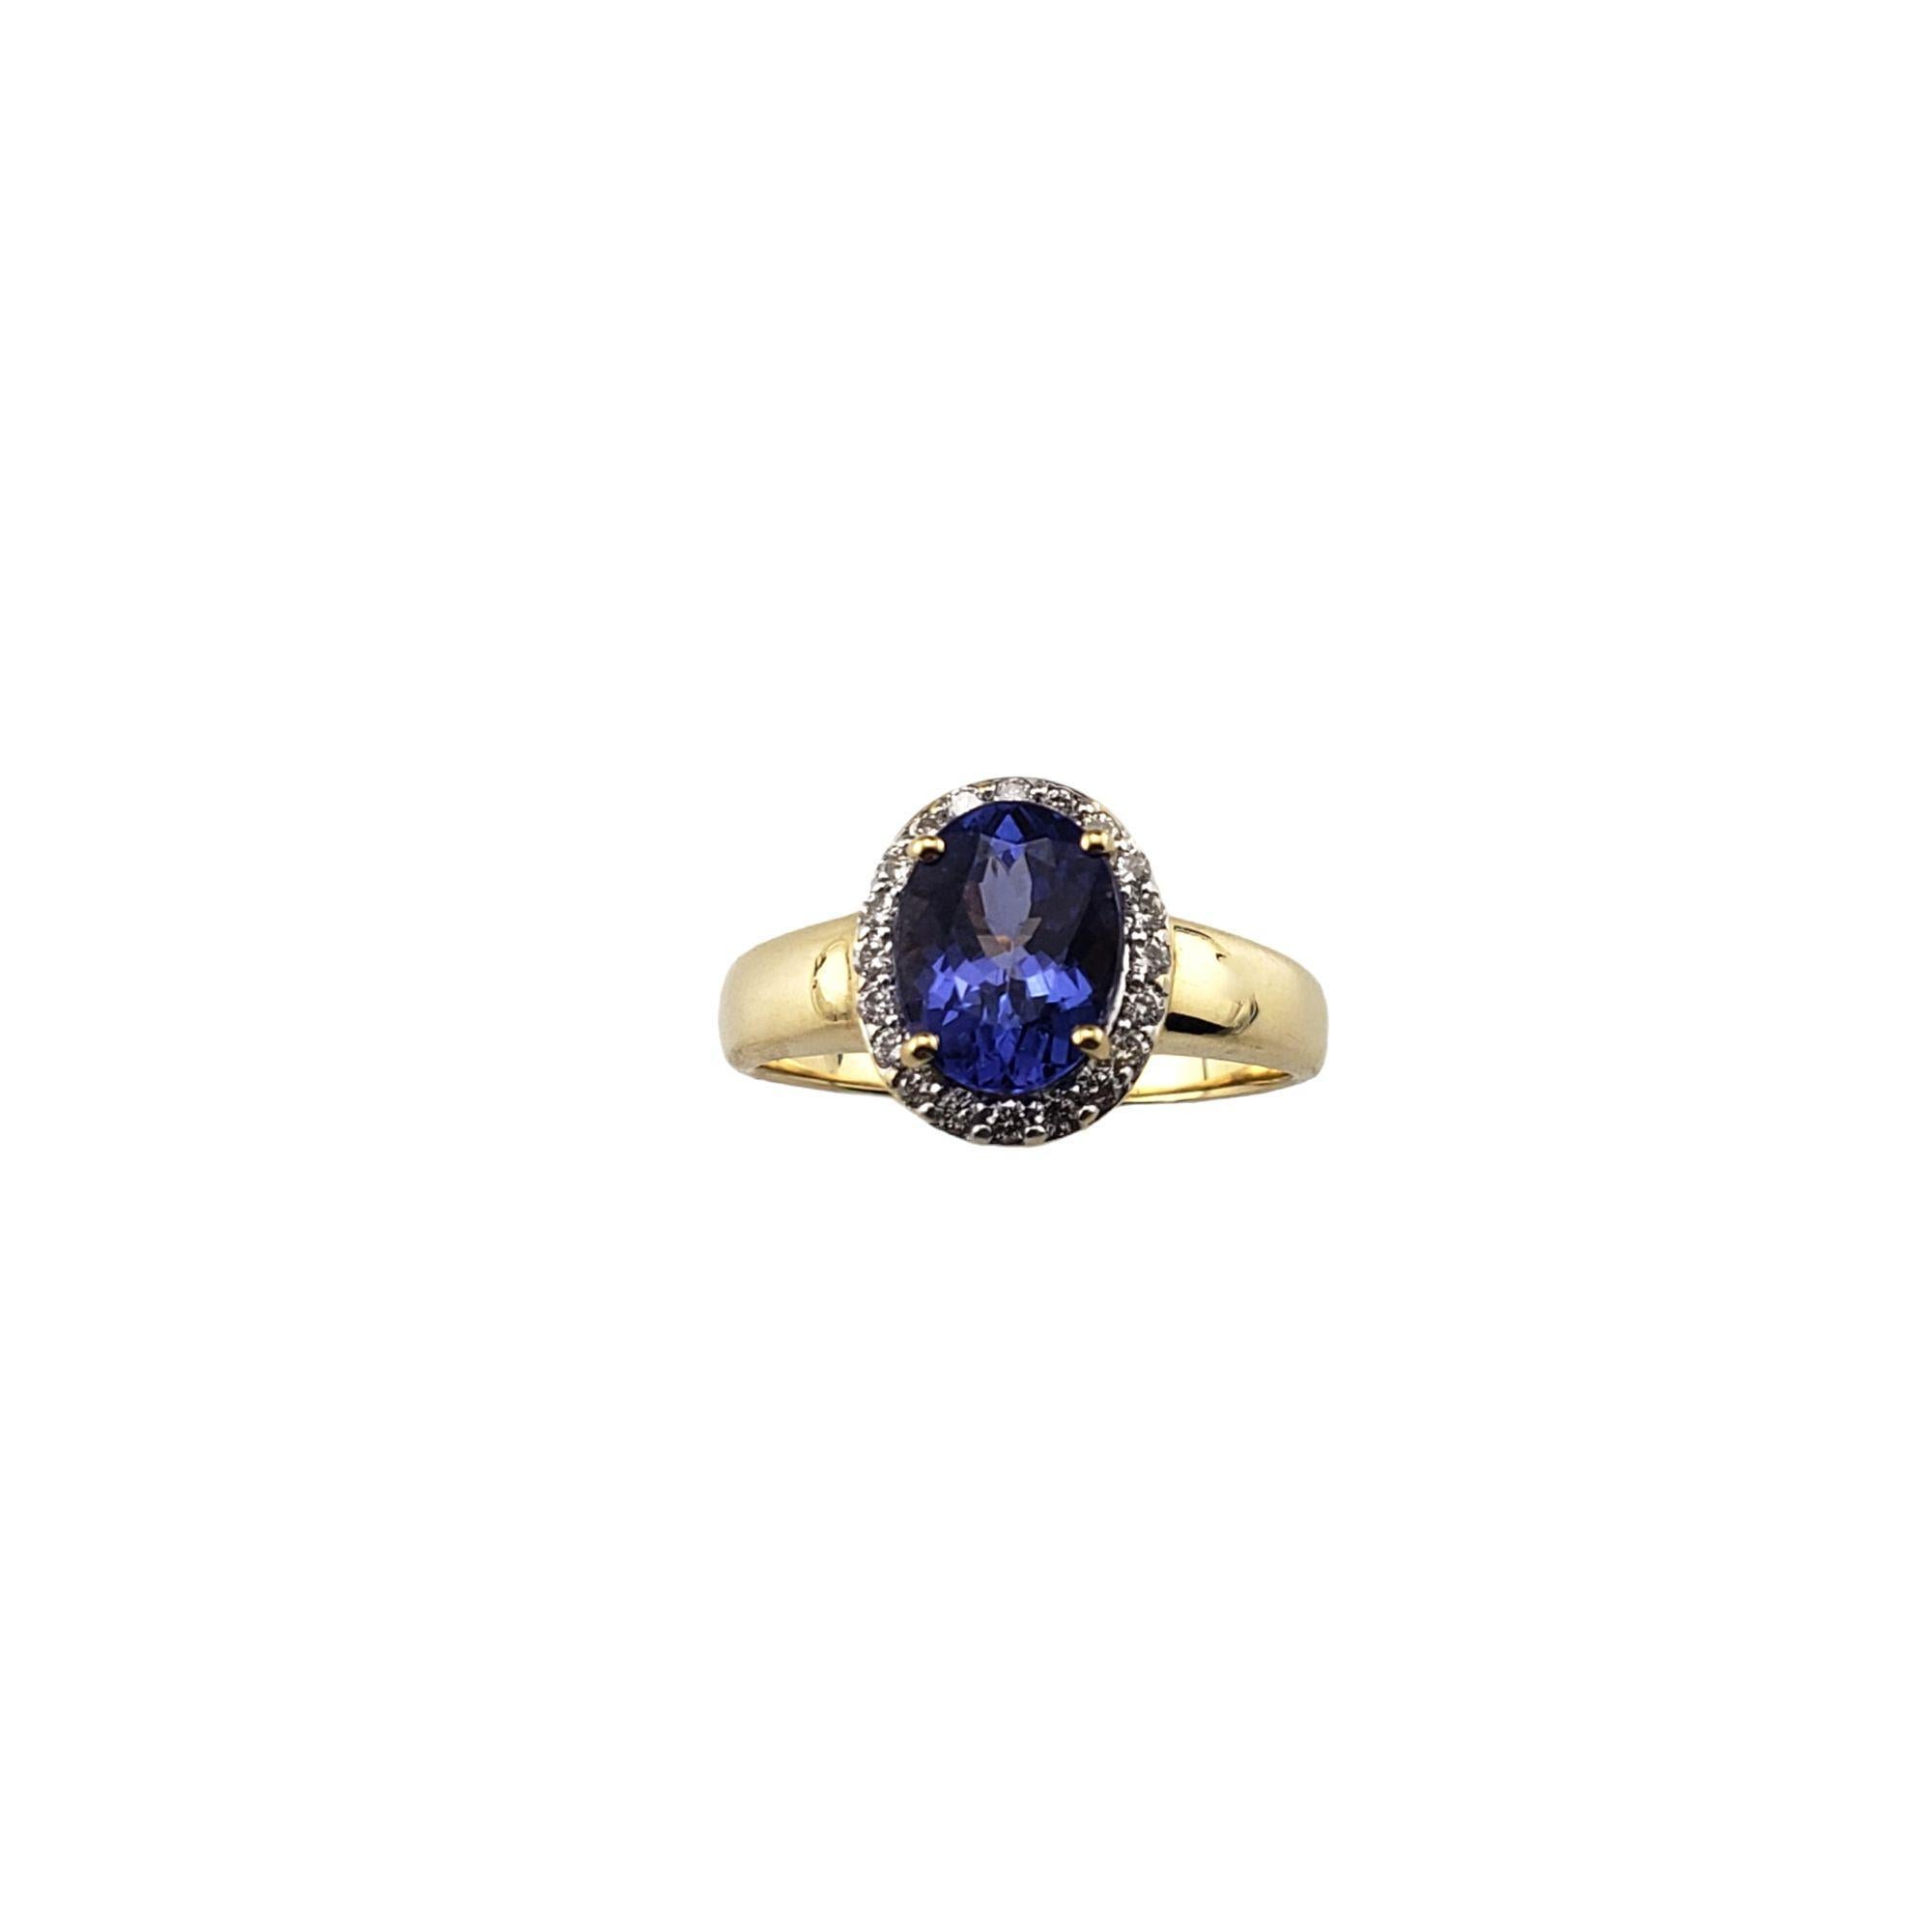 18 Karat Yellow Gold Tanzanite and Diamond Ring Size 7 JAGi Certified-

This stunning ring features one oval tanzanite (8.9 mm x 6.8 mm) surrounded by 20 round brilliant cut diamonds set in classic 18K yellow gold. Width: 12 mm. Shank: 2